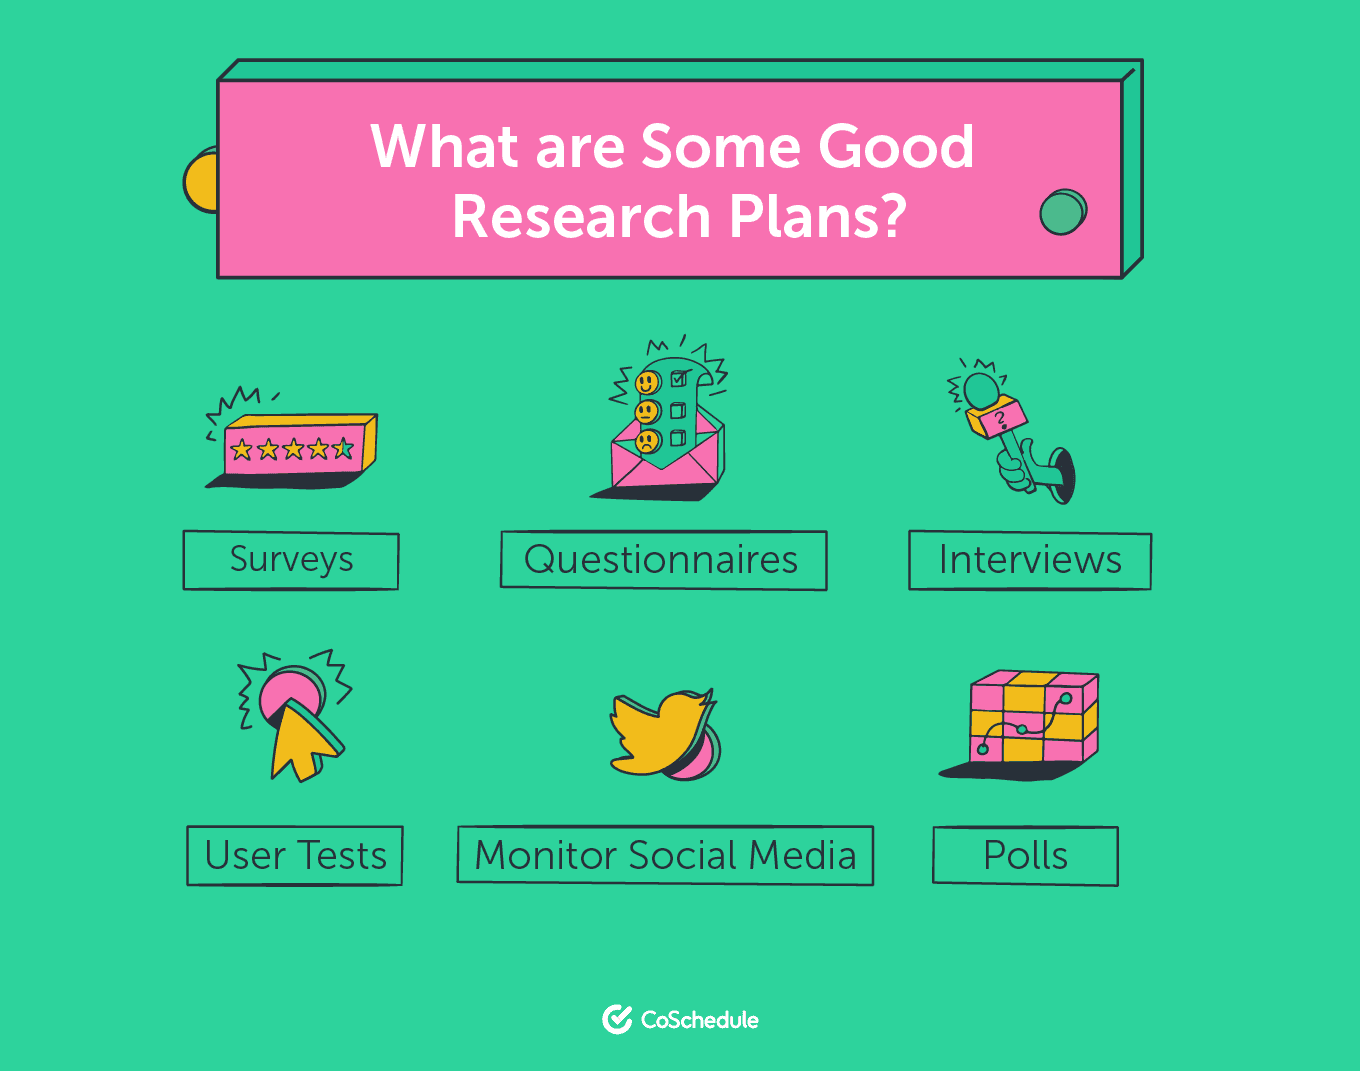 Good research plans